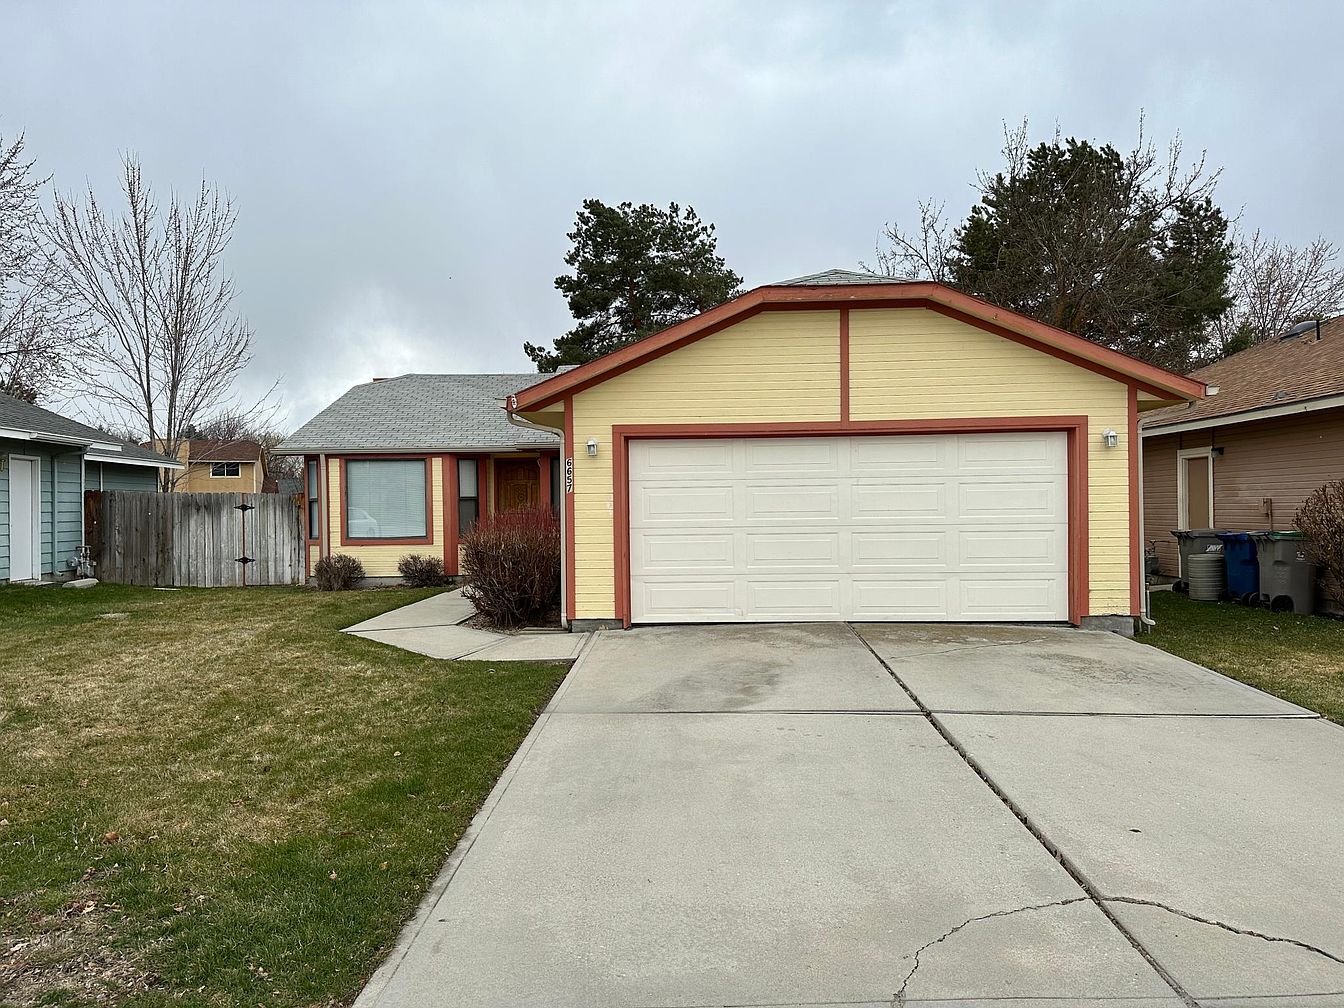 6657 W Limelight Dr, Boise, ID 83714 | Zillow